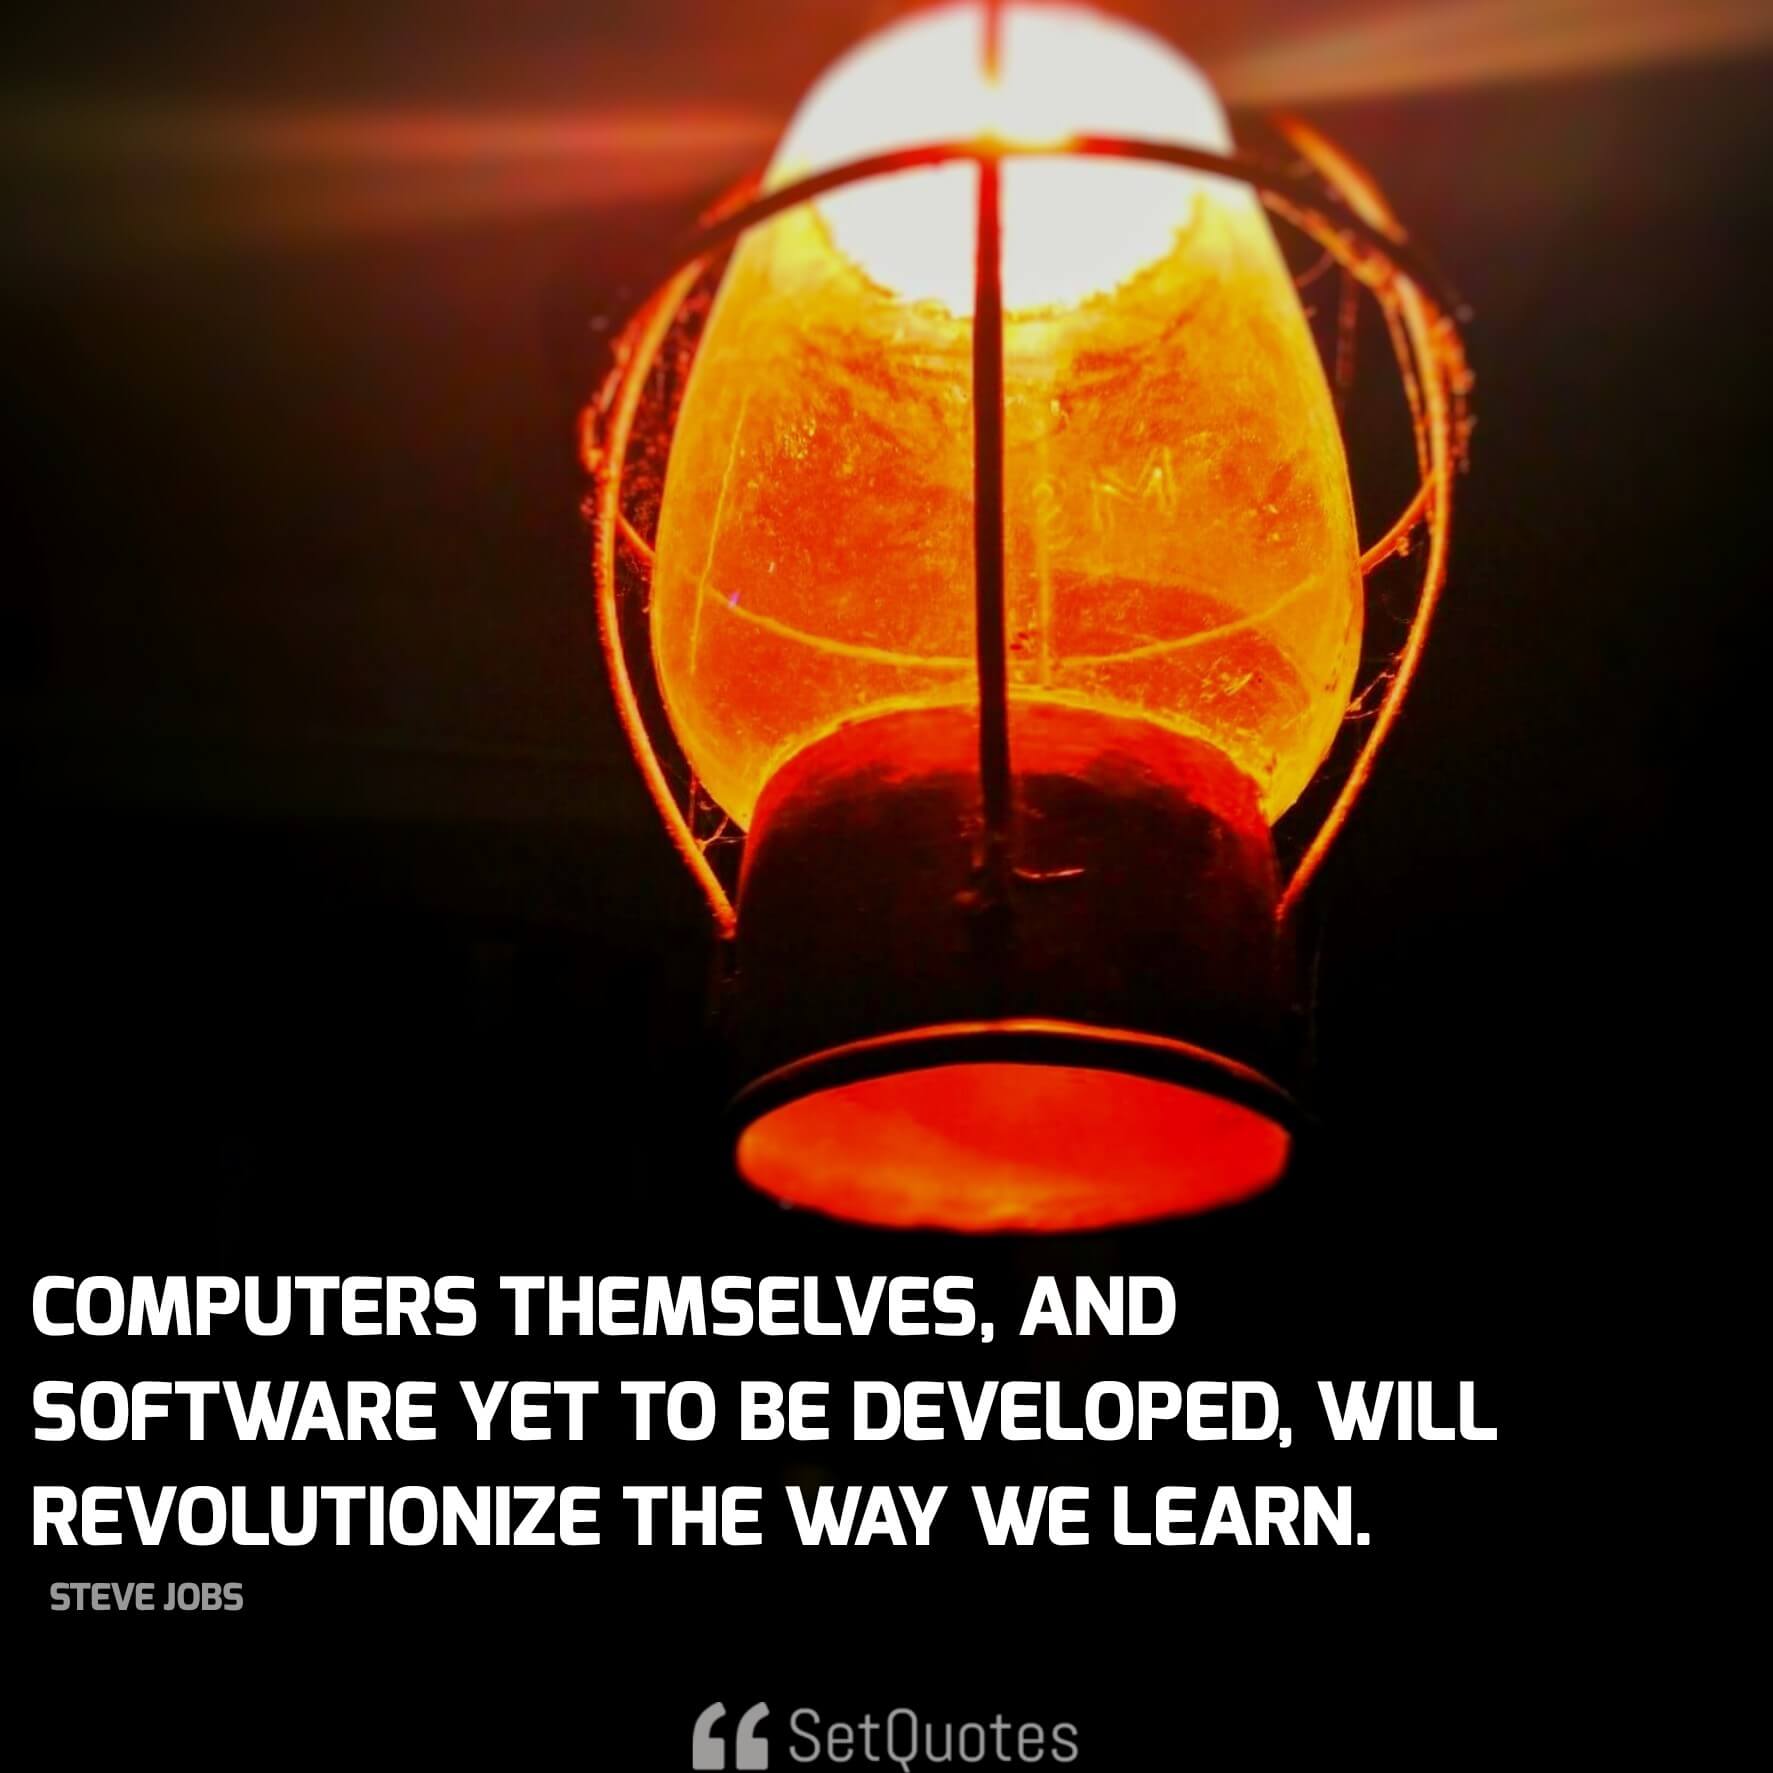 Computers themselves, and software yet to be developed, will revolutionize the way we learn. - steve jobs quotes